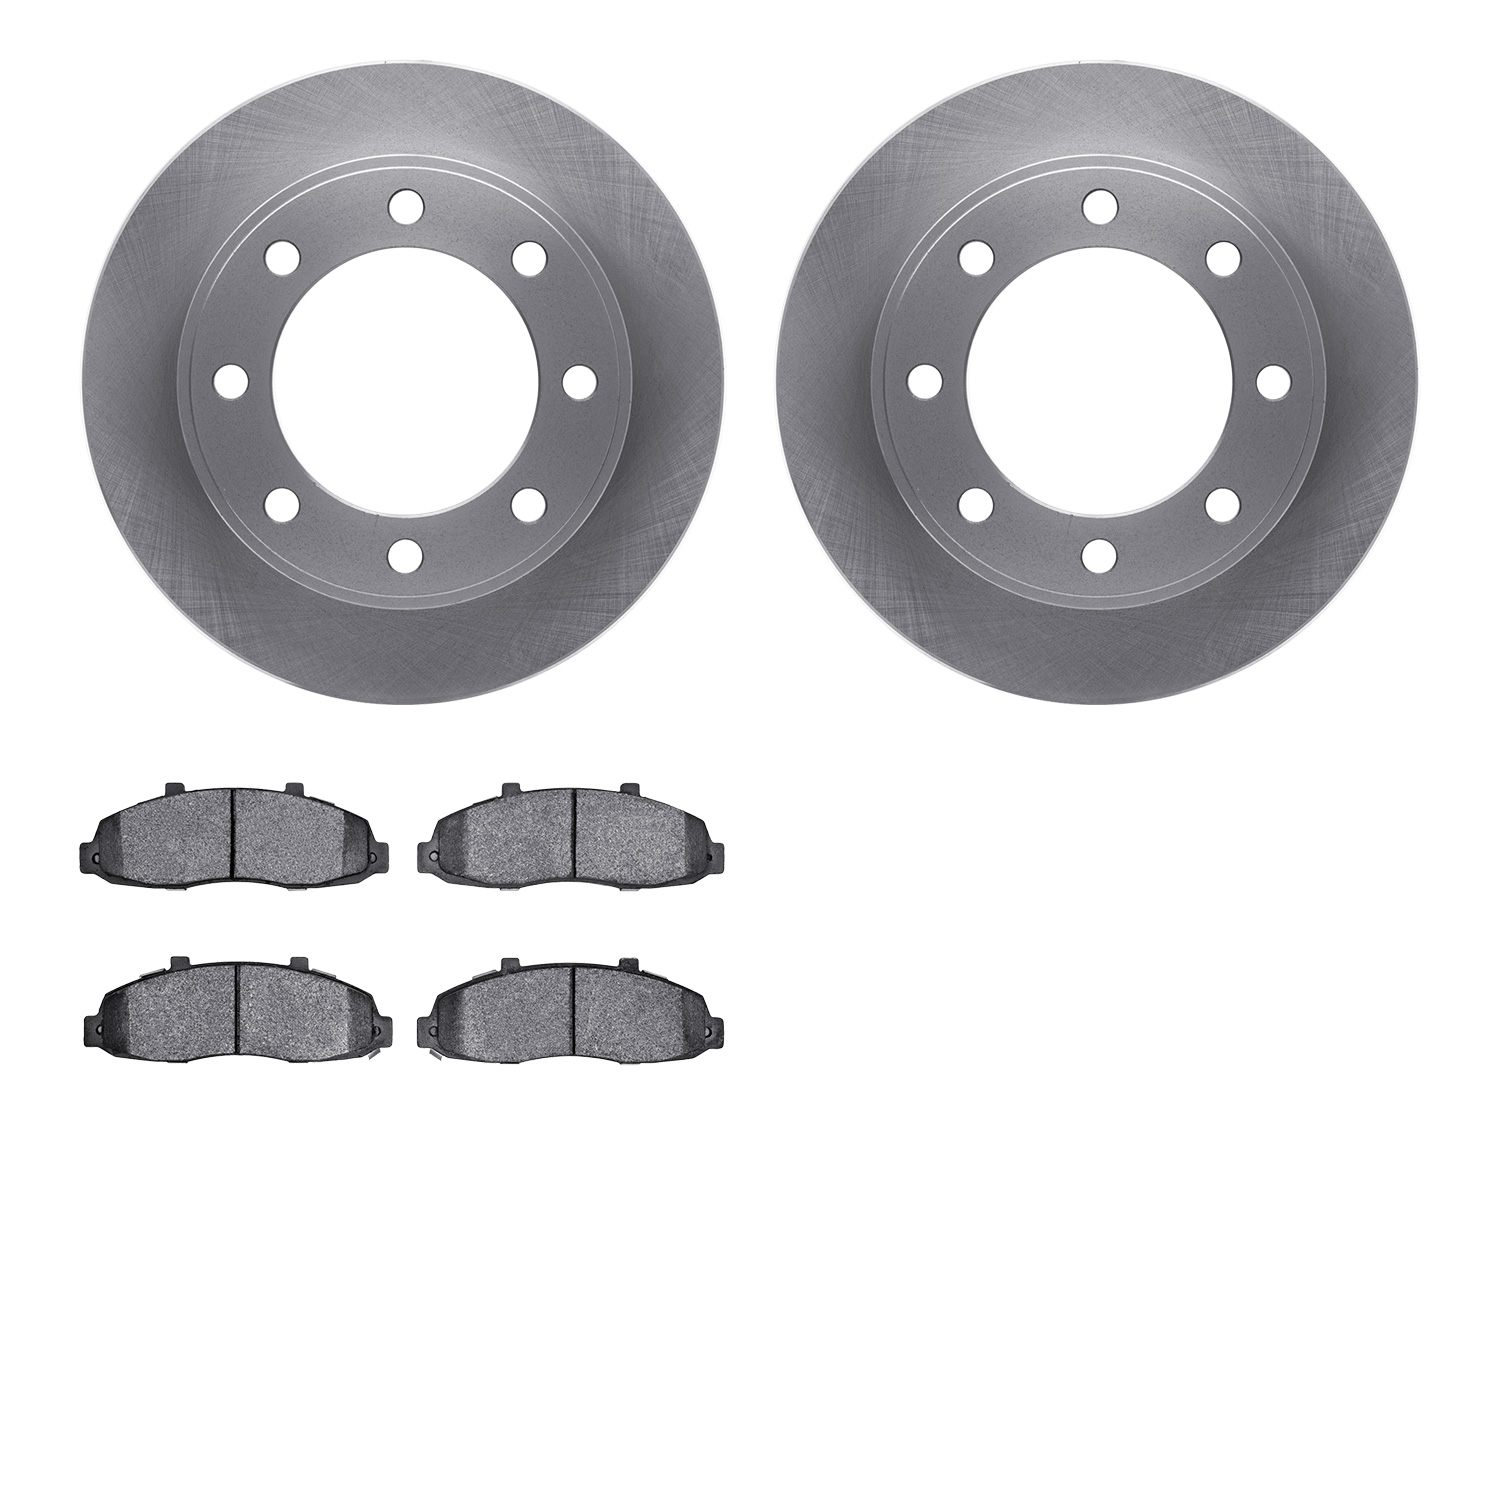 6402-54101 Brake Rotors with Ultimate-Duty Brake Pads, 1997-2004 Ford/Lincoln/Mercury/Mazda, Position: Front